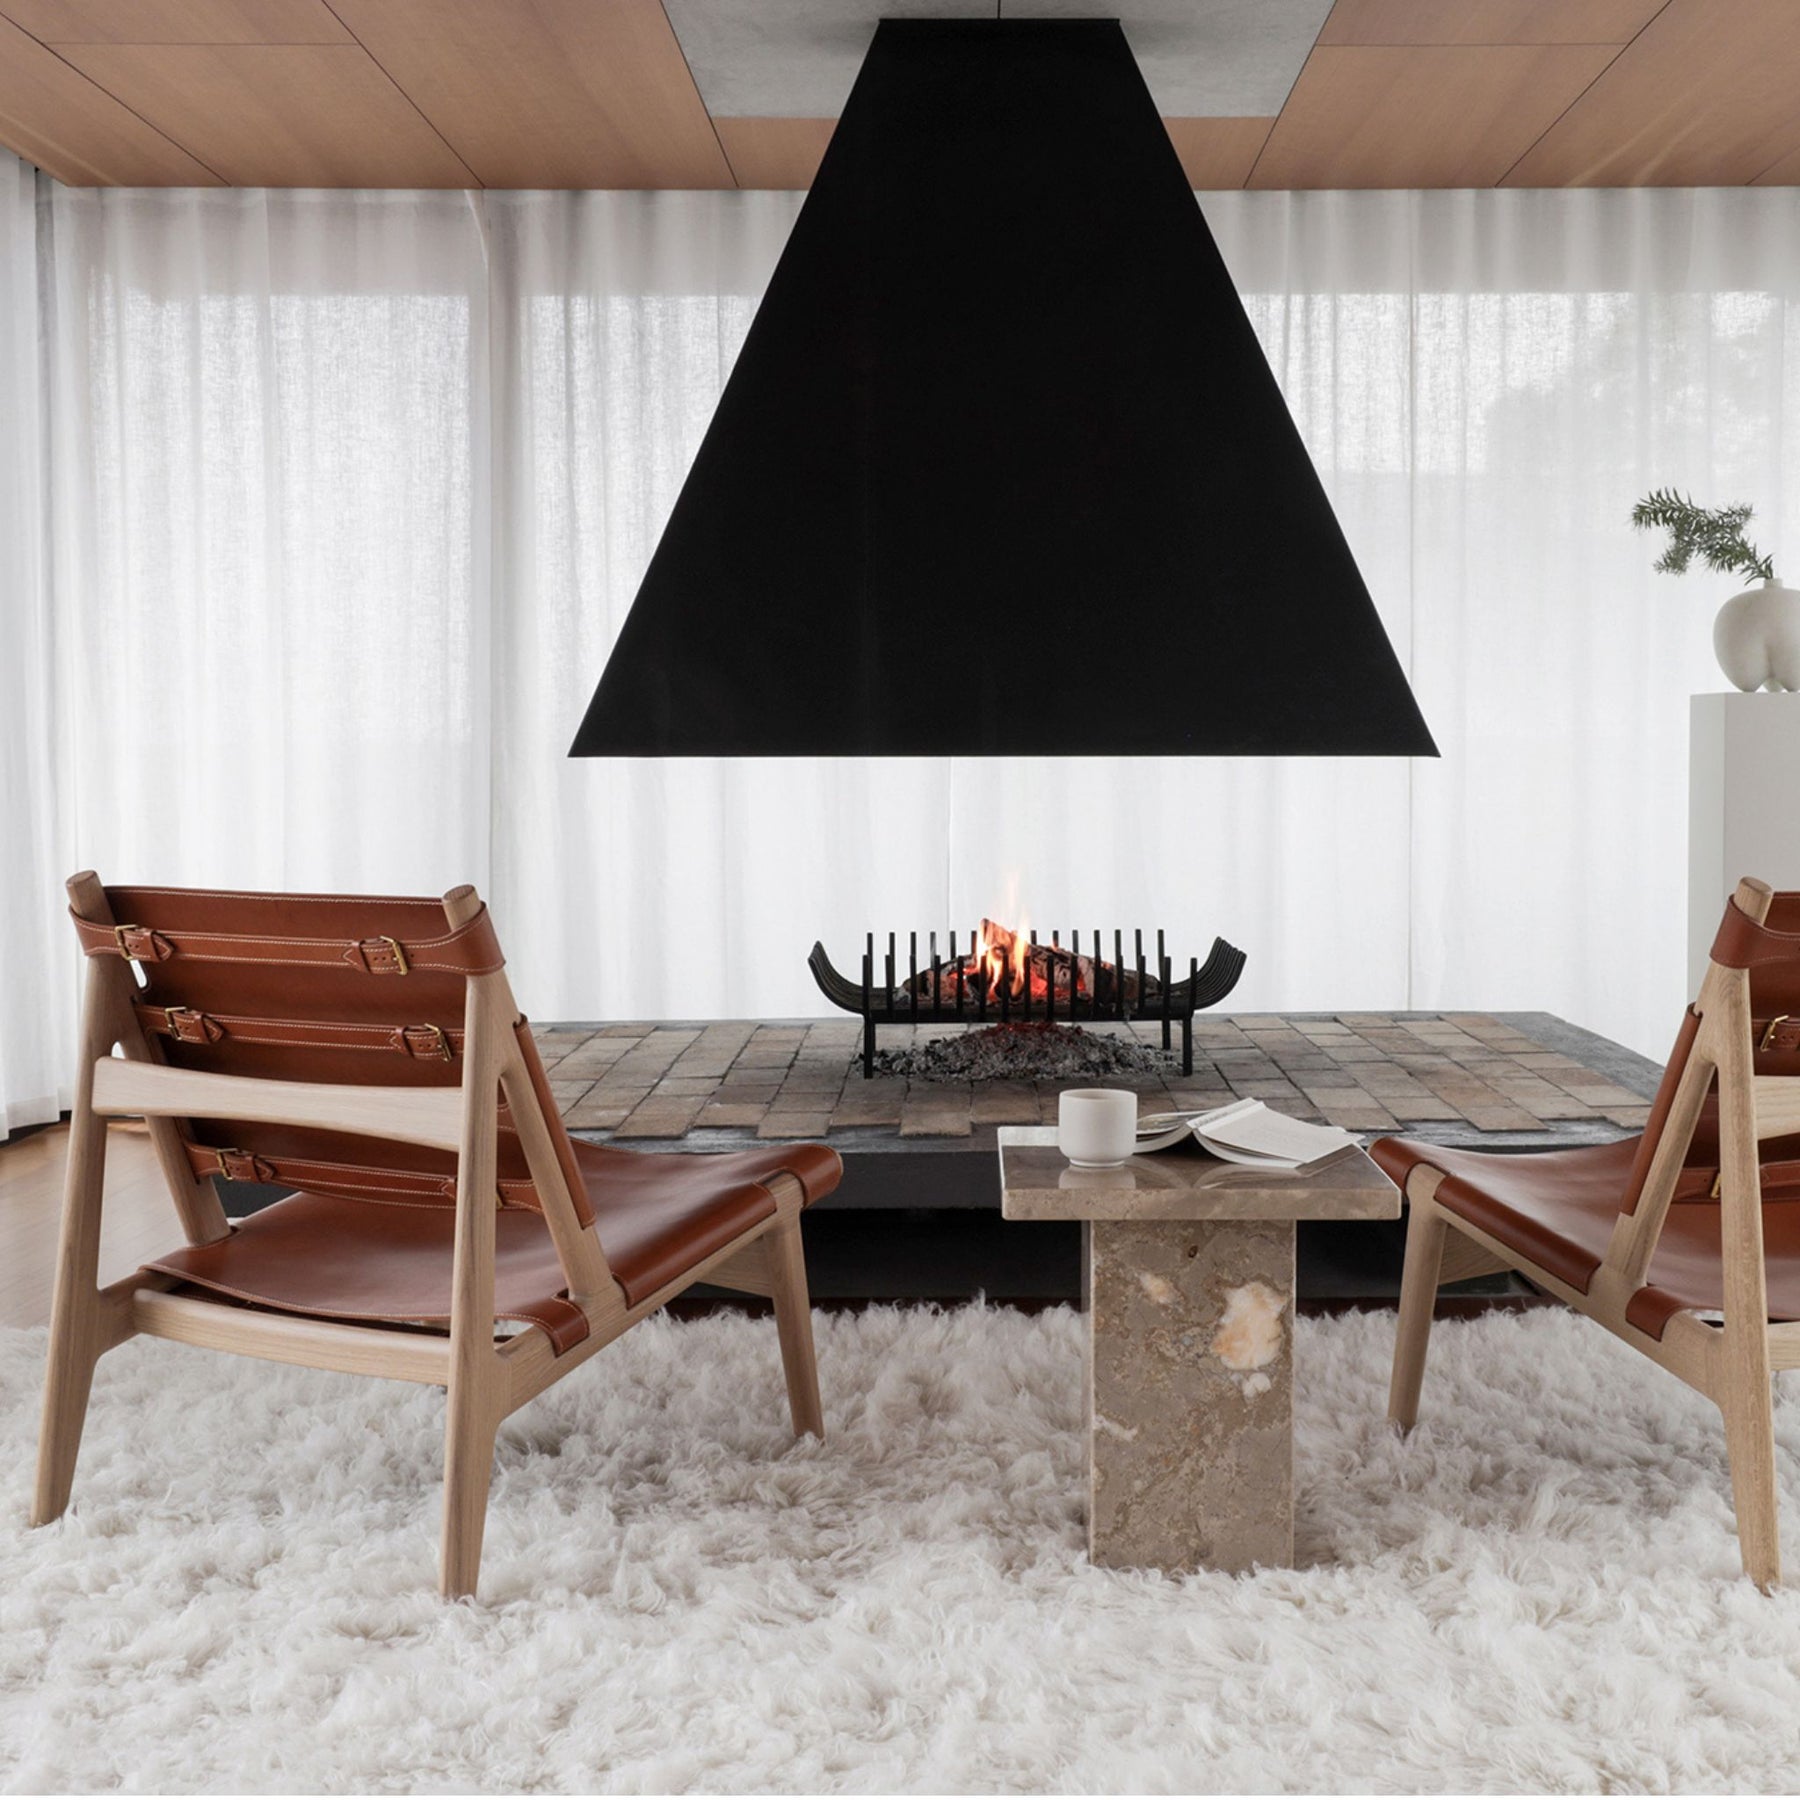 Eikund Hunter Chairs Cognac Saddle Leather with Oak Oil Frame on Cozy Shag Rug by Fireplace